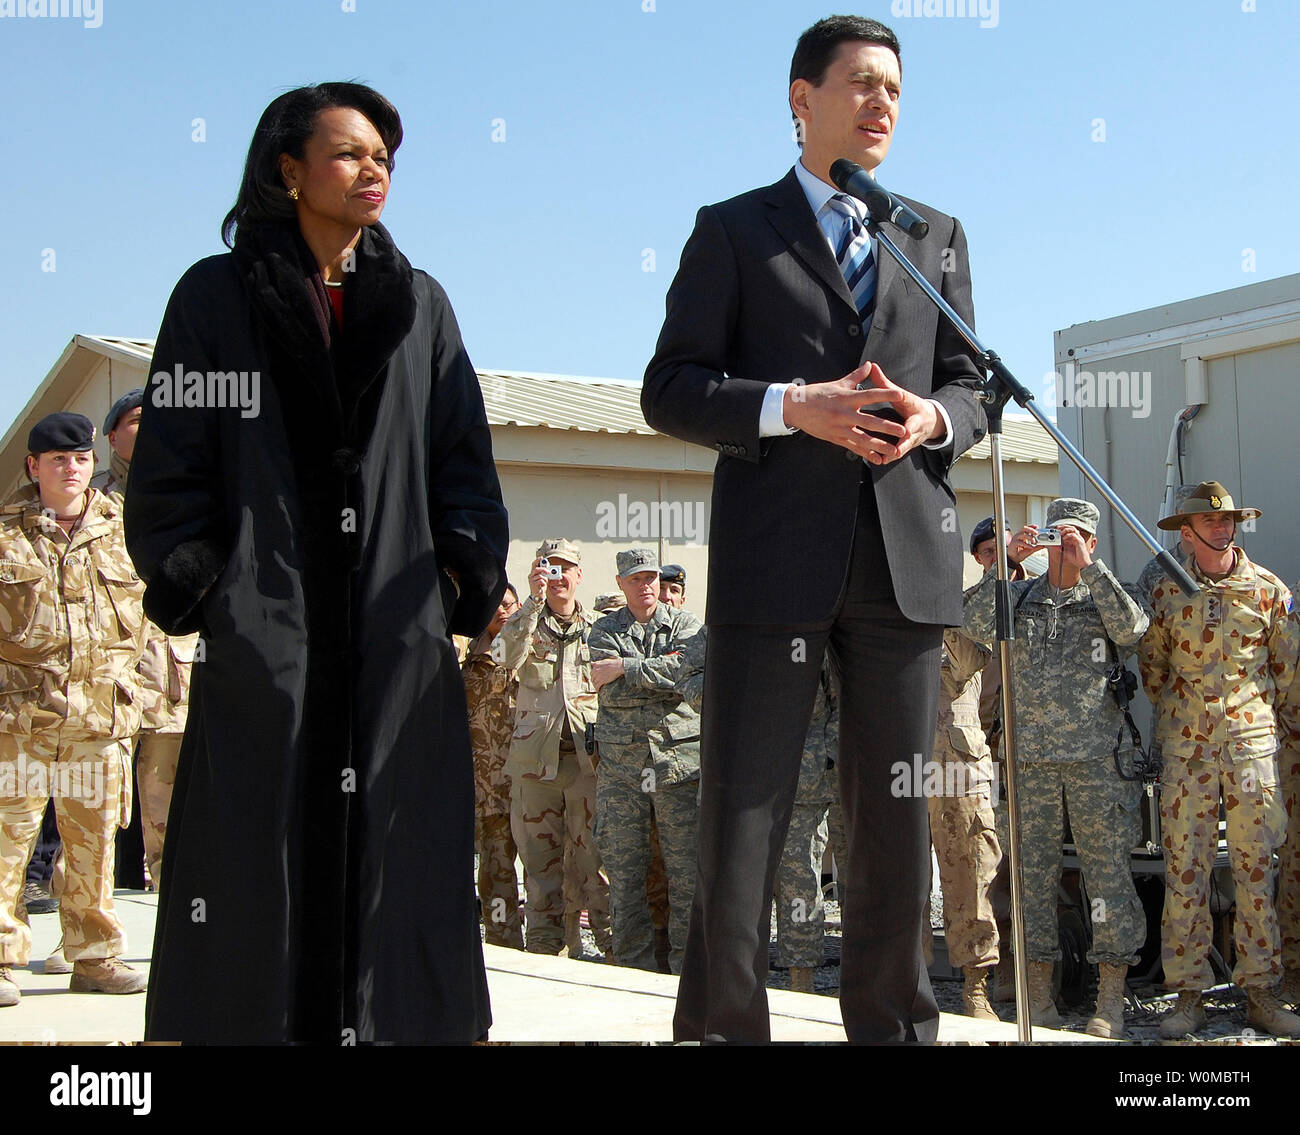 Secretary of State Condoleezza Rice (L) and British Foreign Secretary David Miliband speak to multinational troops on Kandahar Airfield in Kandahar, Afghanistan on February 7, 2008. Rice and Miliband are visiting the area to meet with troops, military leaders and top government officials. (UPI Photo/Steven Park/U.S. Navy) Stock Photo